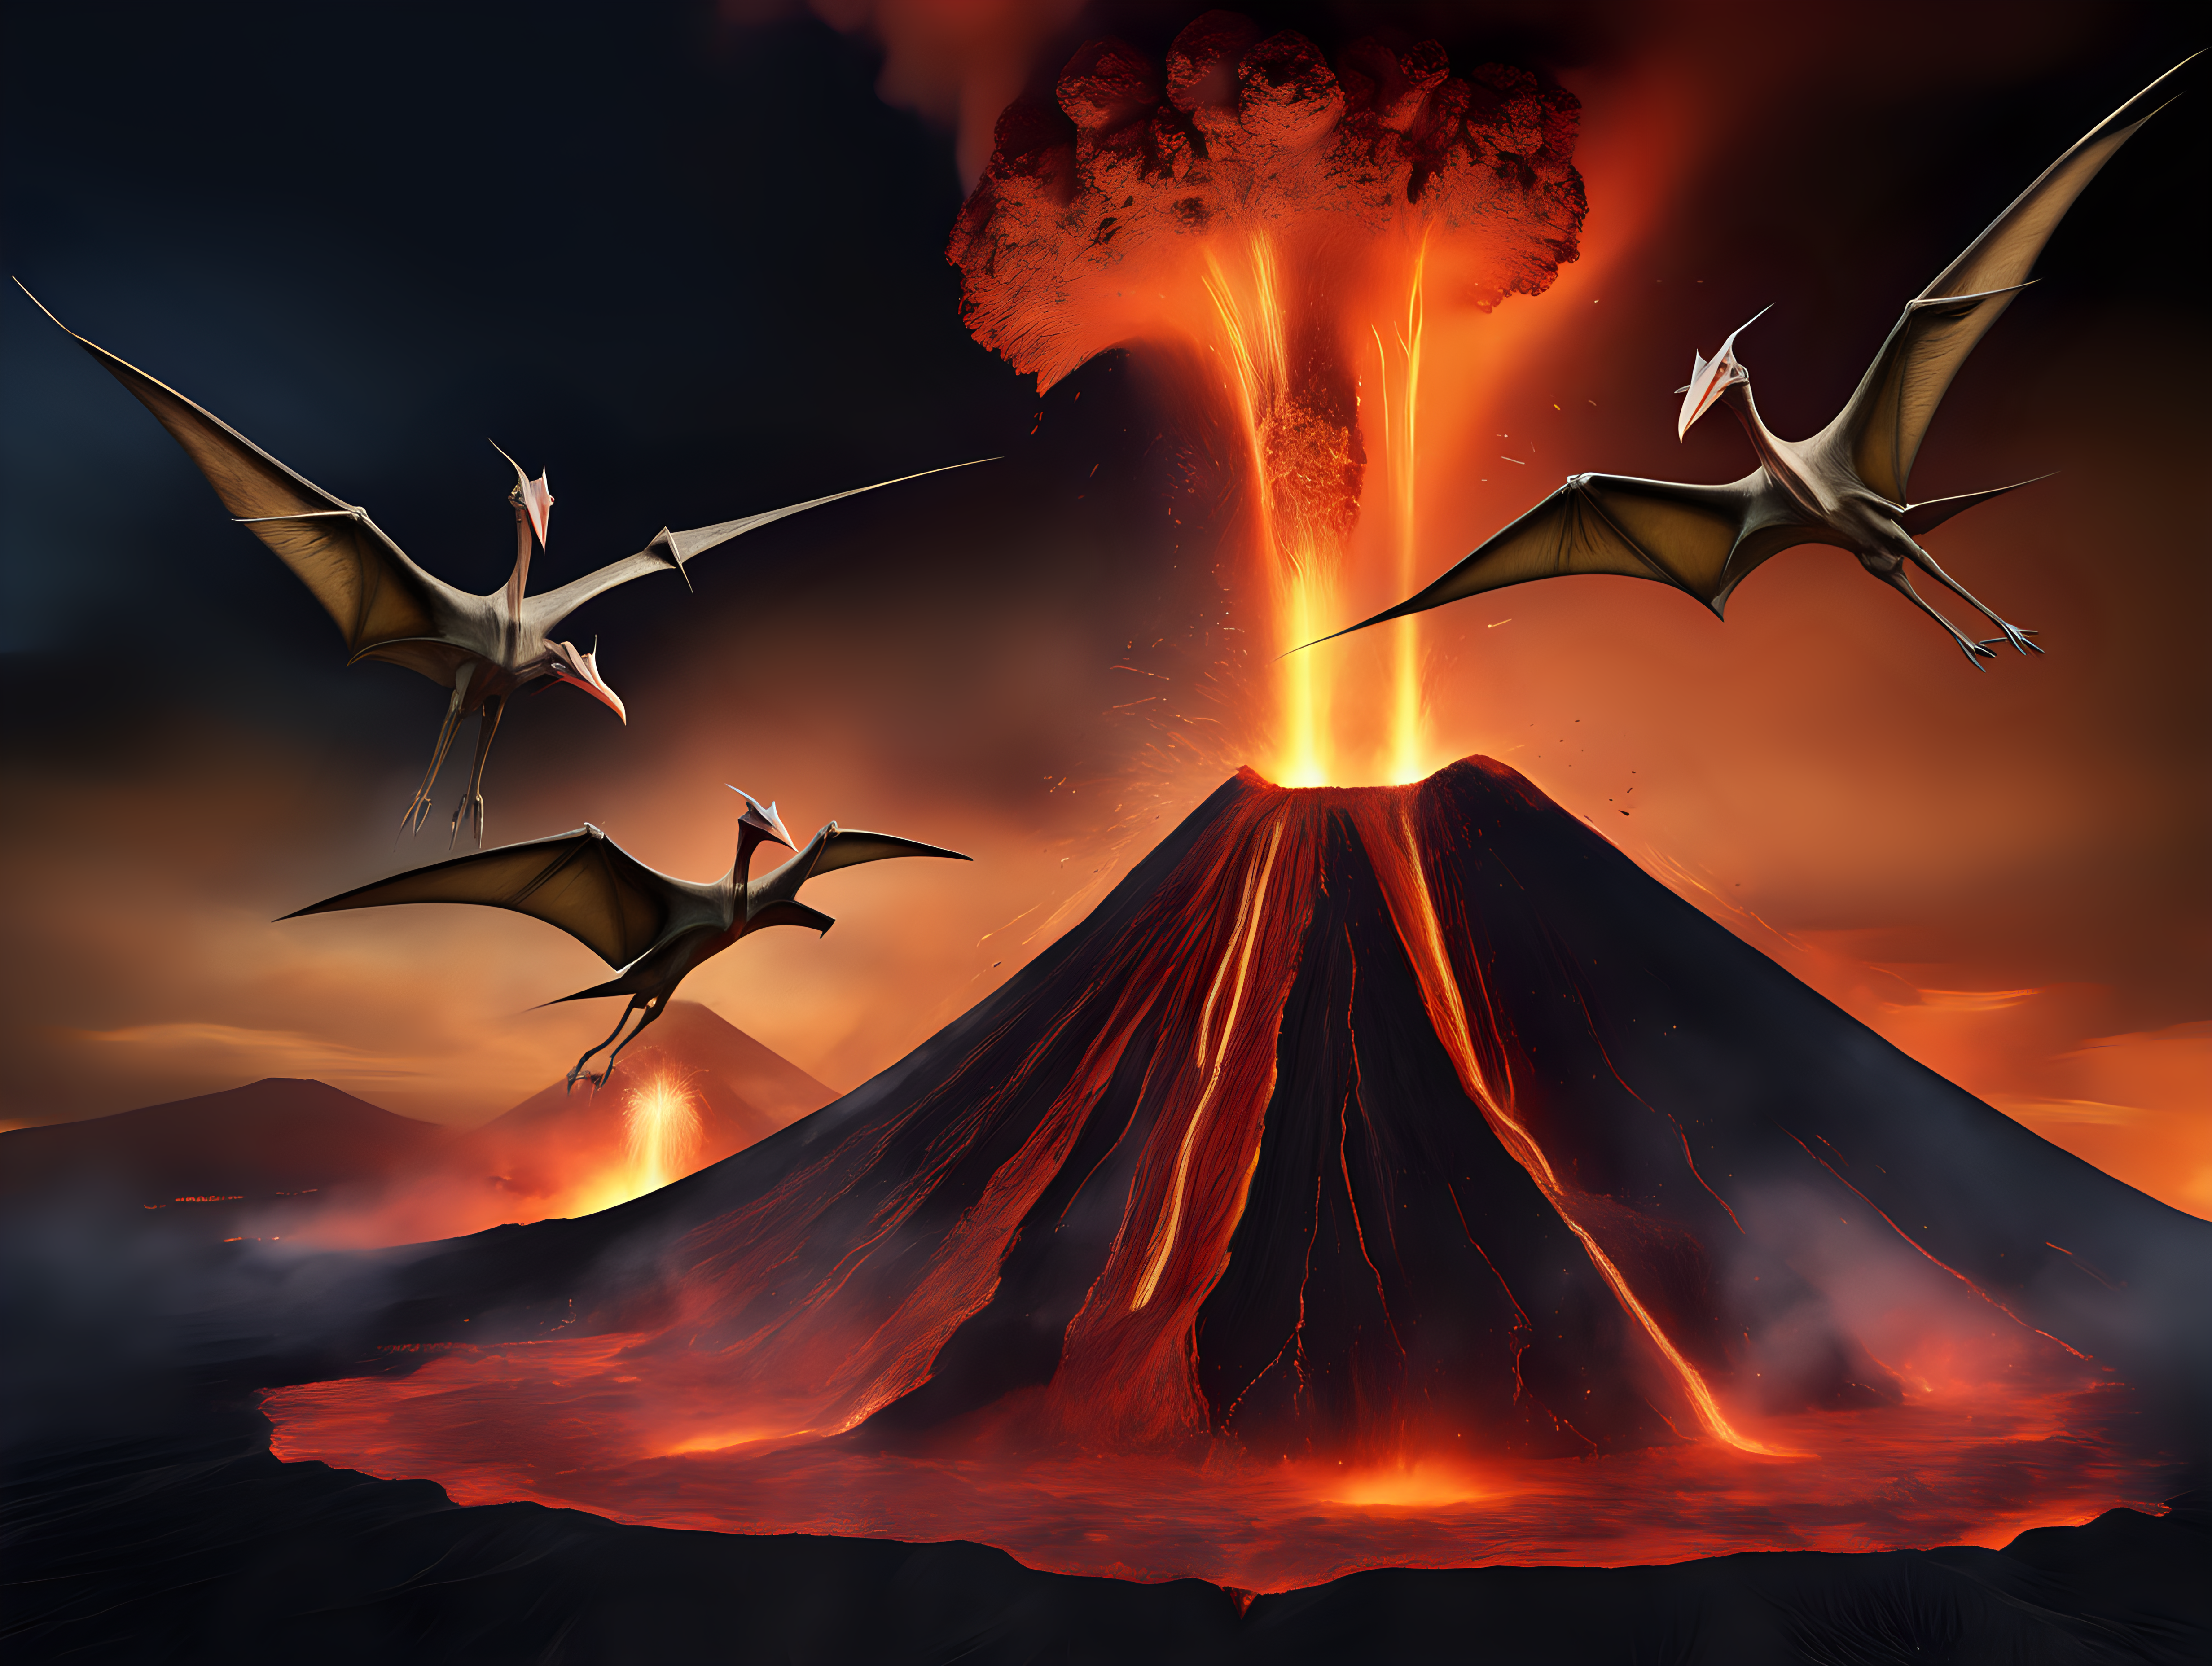 3 pterodactyls flying over an exploding volcano at